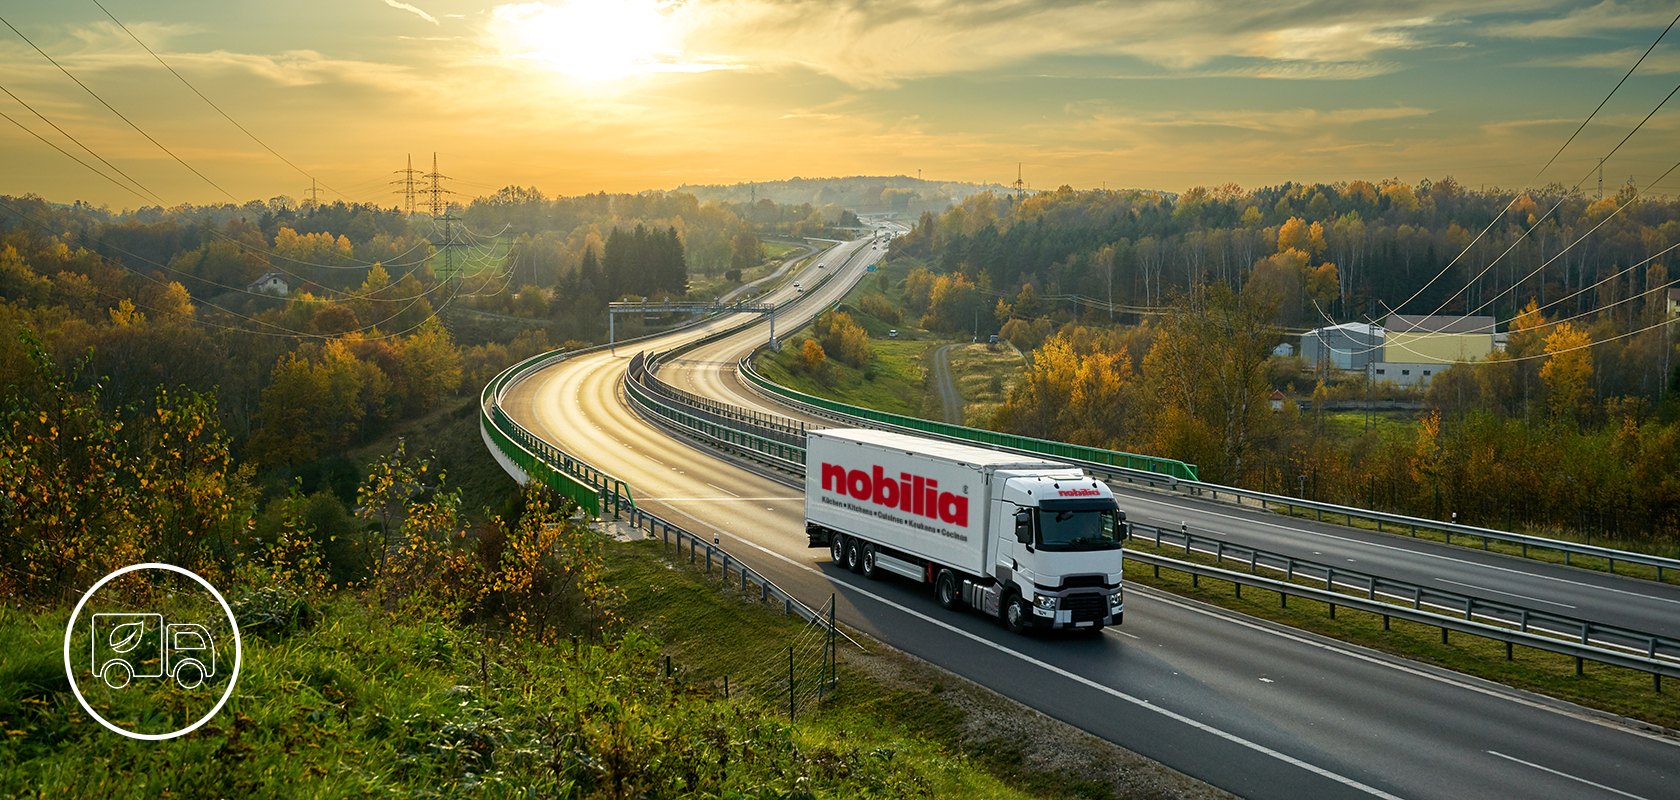 A commercial truck from the "nobilia" brand travels on a curving highway amidst a vibrant autumn landscape with foliage and distant rolling hills.